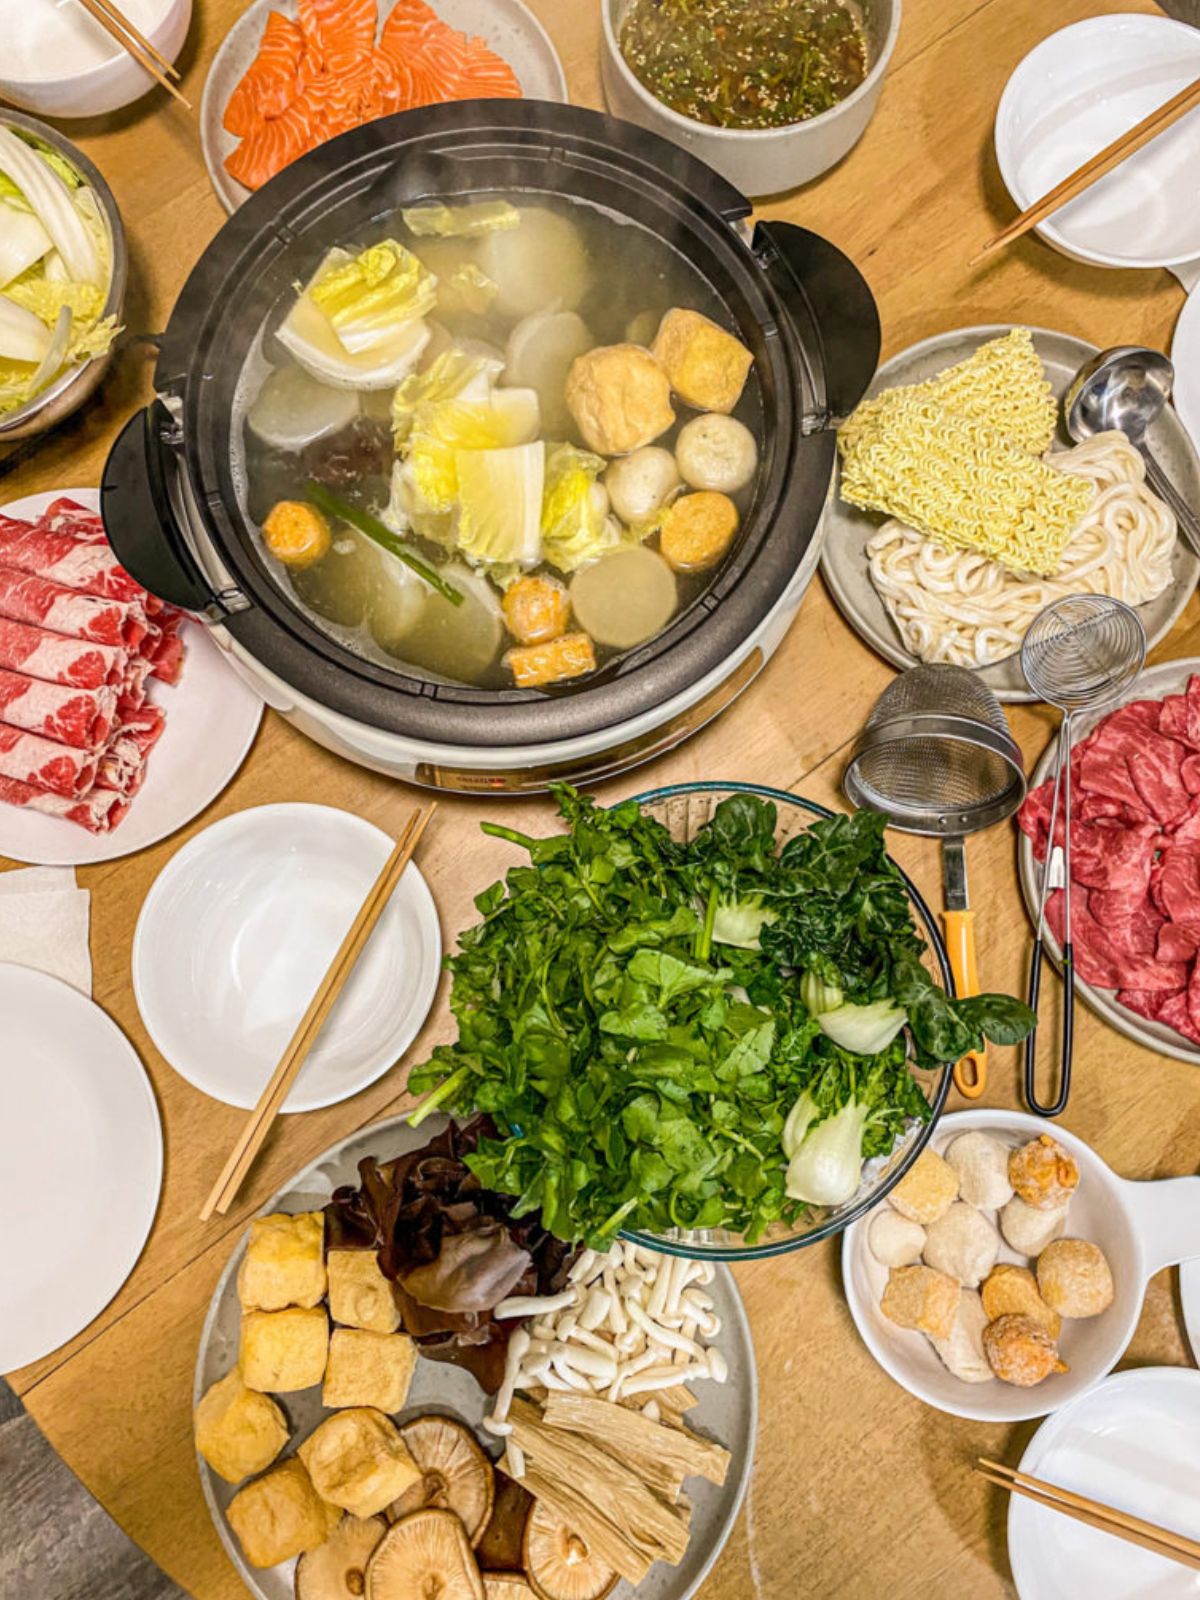 Hot pot on dining table filled with vegetables, ramen, tofu, mushrooms, raw beef, and fish balls.